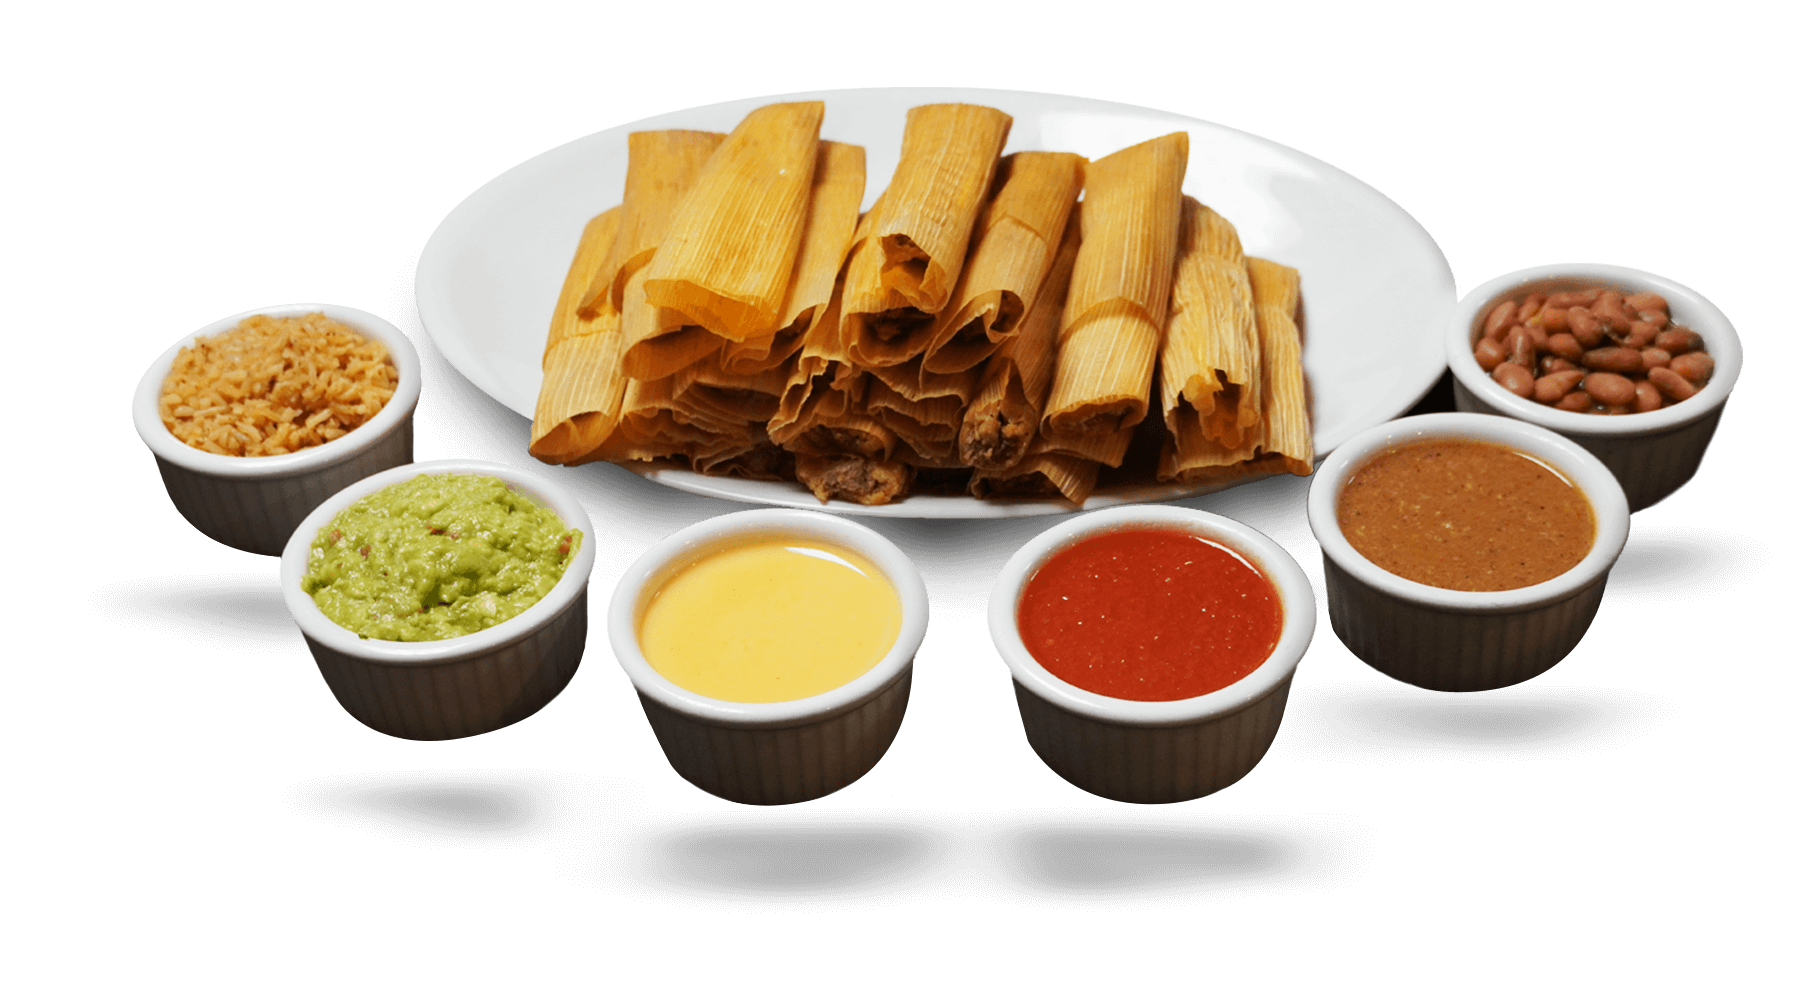 Plate of traditional Mexican tamales surrounded by bowls of different sauces